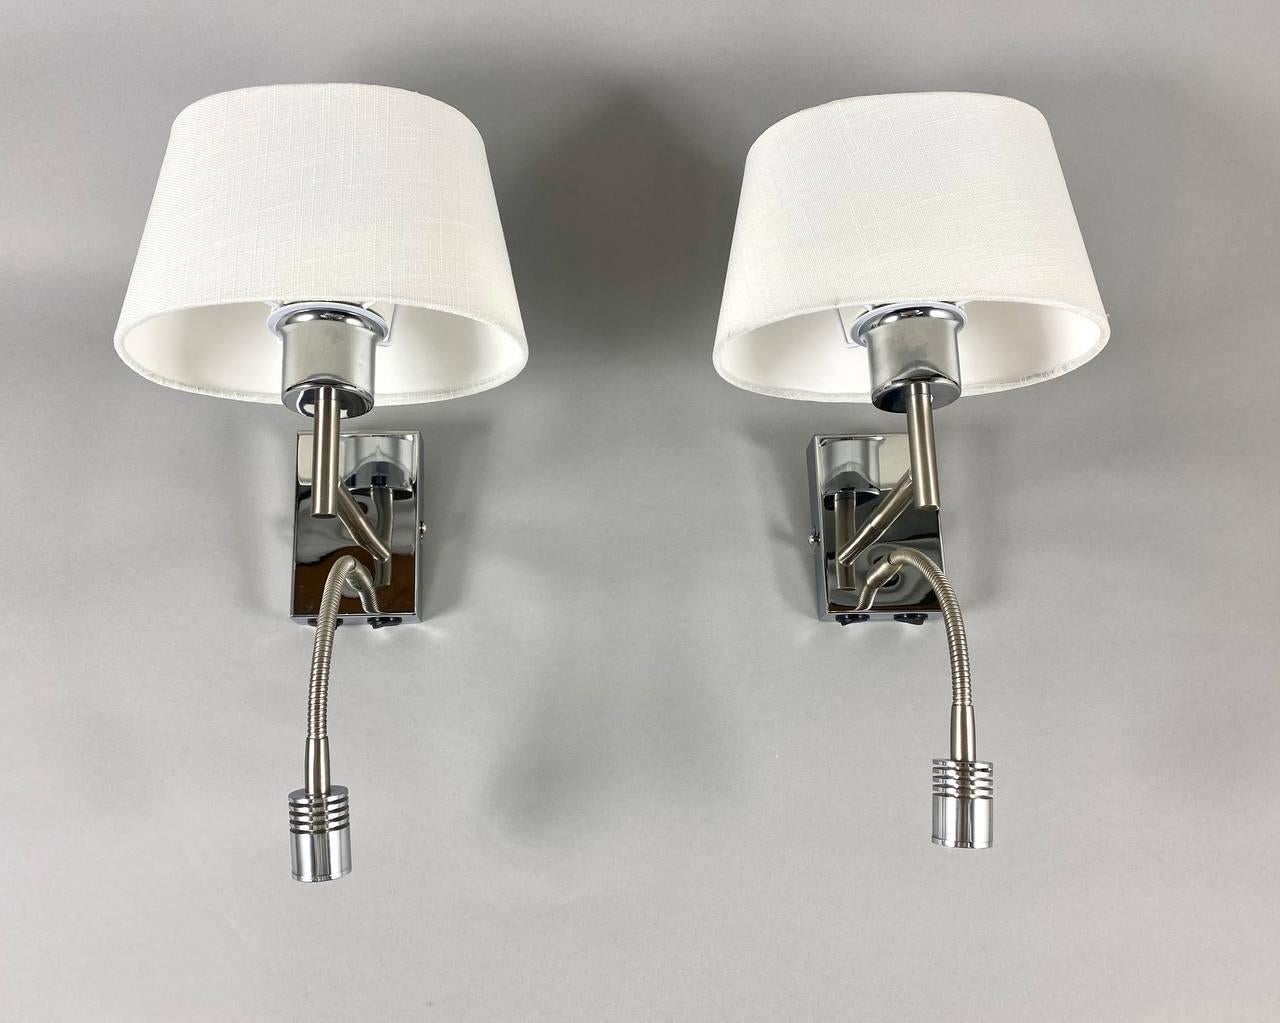 Vintage Wall Lamps with New white fabric shades and LED reading light by Honsel Leuchten. 

2000s.

The lamps are a combination of stainless steel with a carefully selected textile shade, which creates a very elegant lamp. They are perfect not